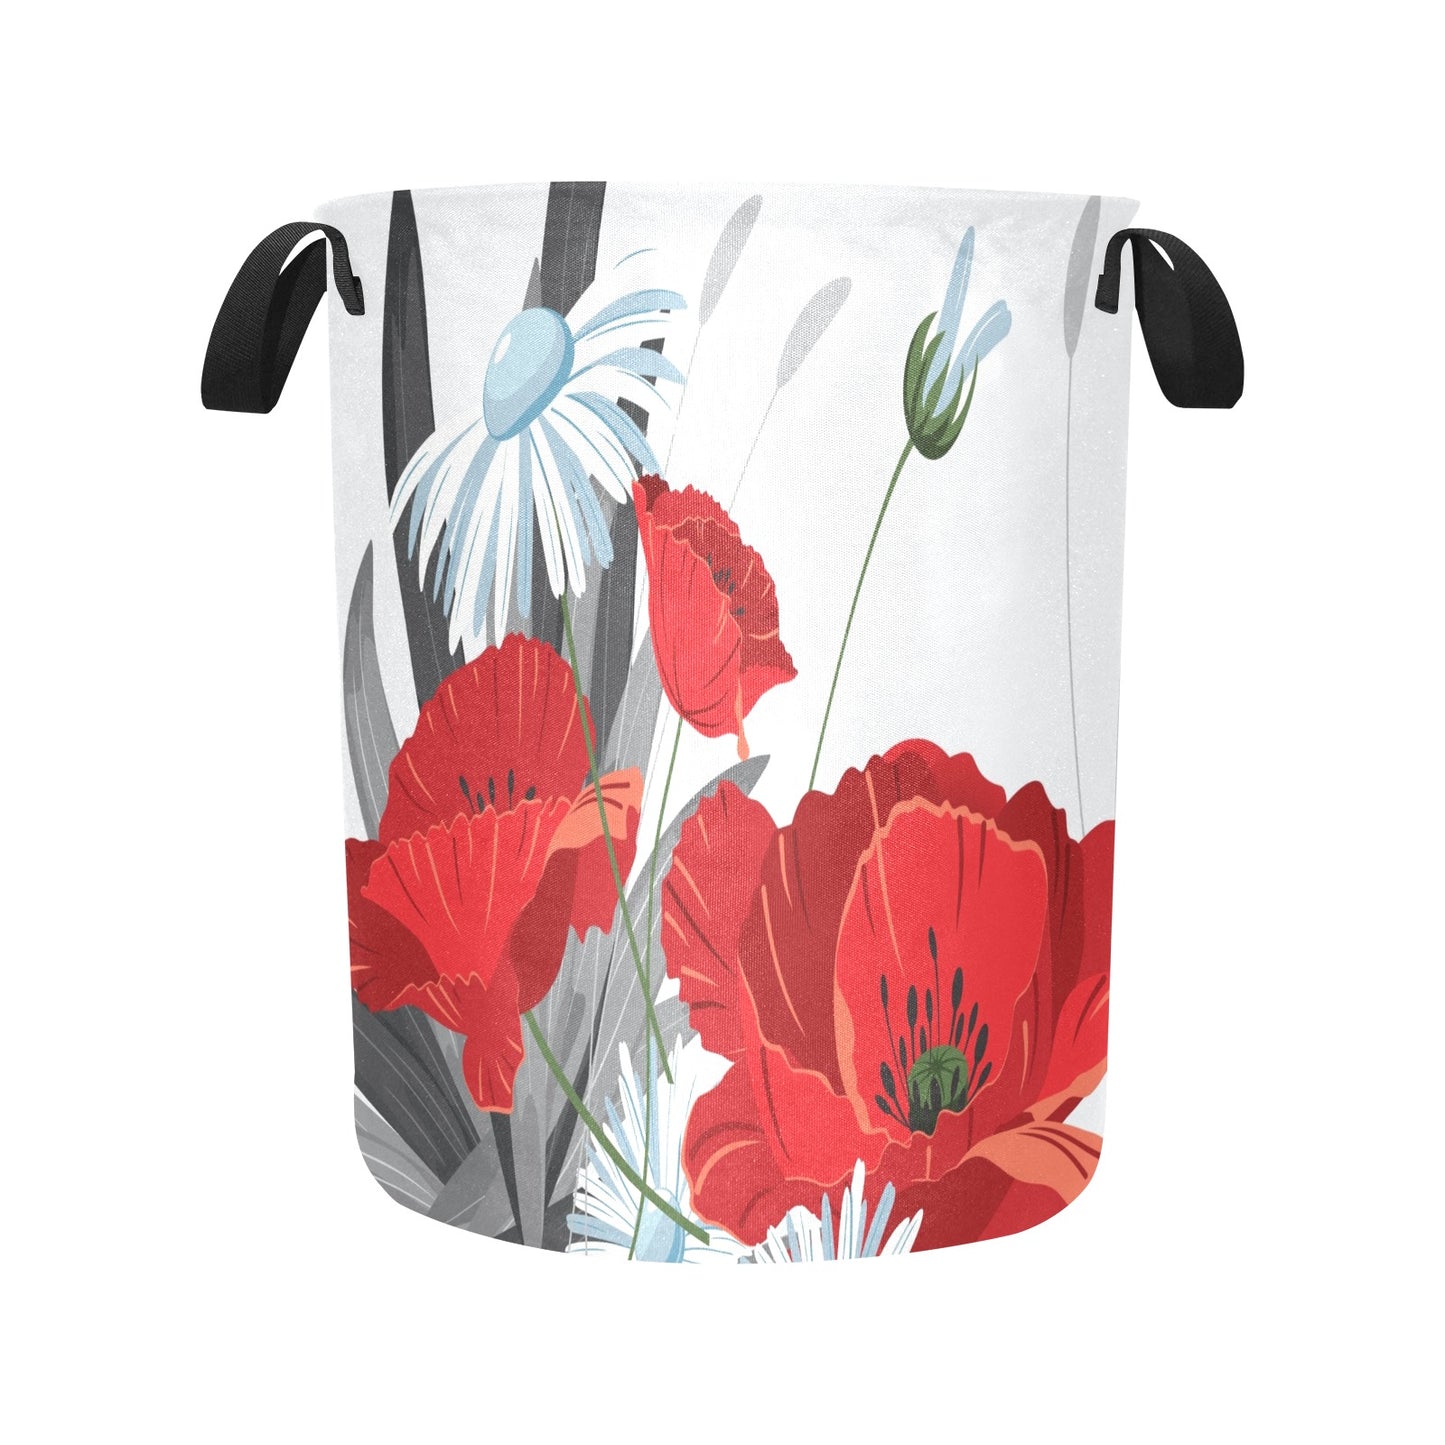 Red Floral Poppies Laundry Bag - Laundry Bag (Large) - Zanlana Design and Home Decor